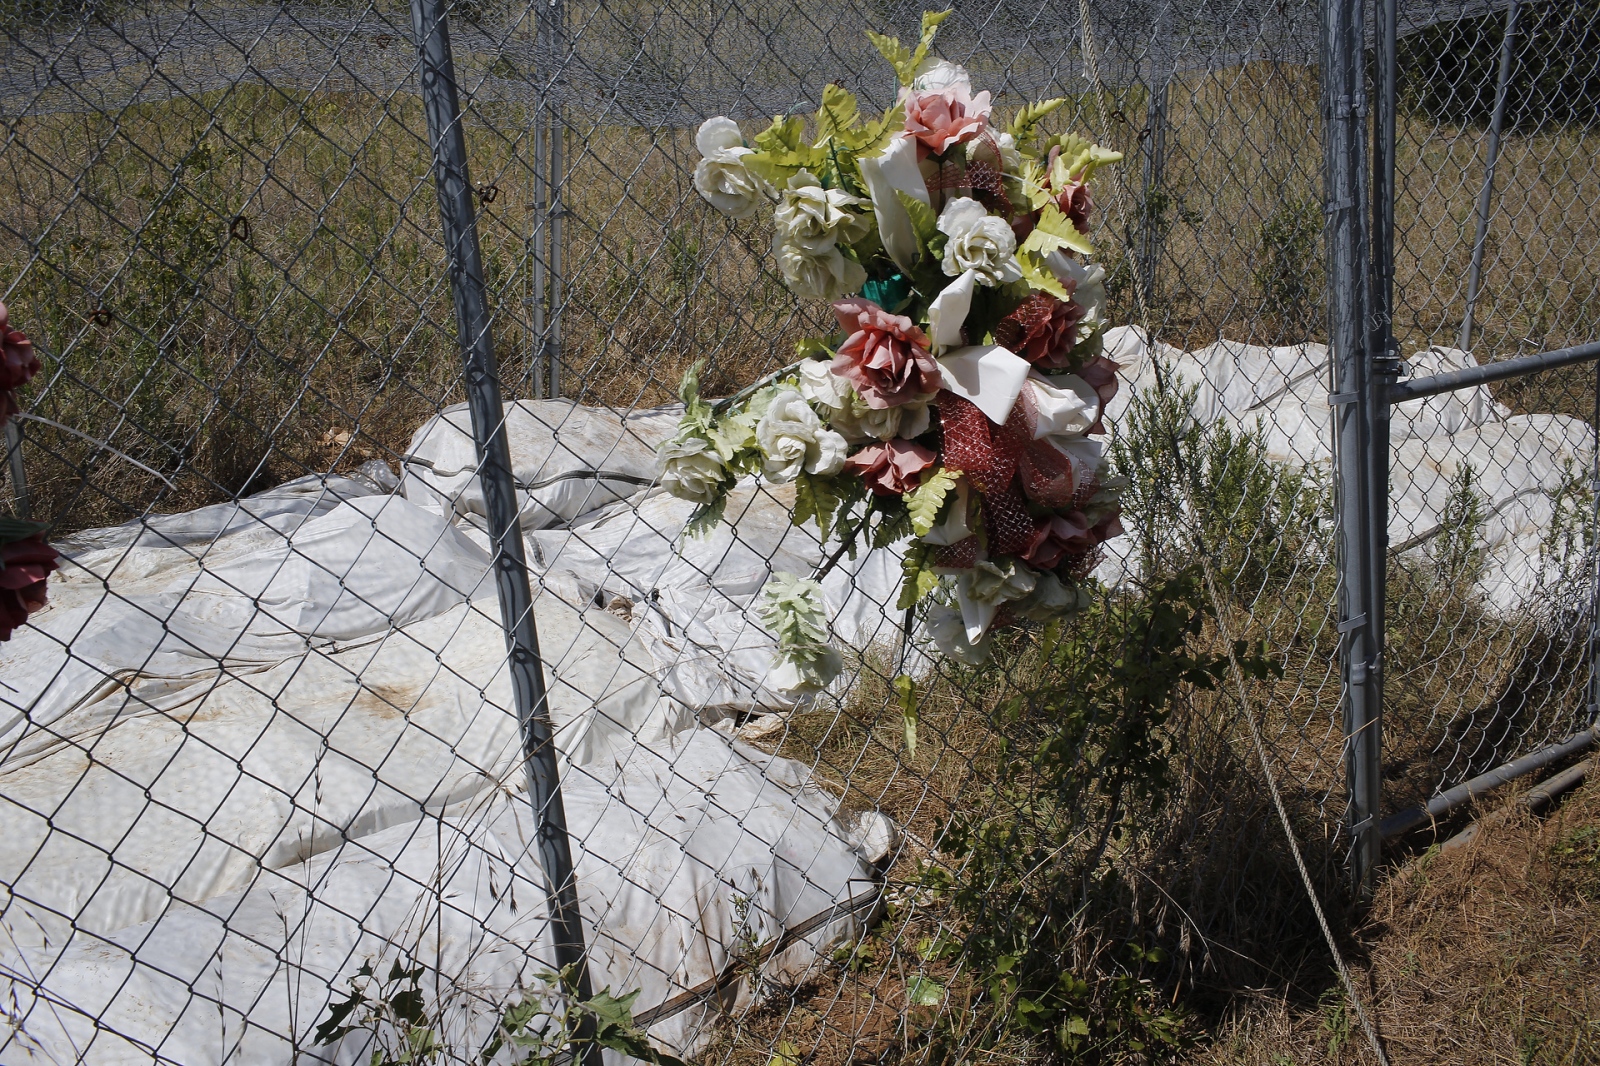 Image from Looking for America - Unidentified undocumented migrants bodies at Texas State...